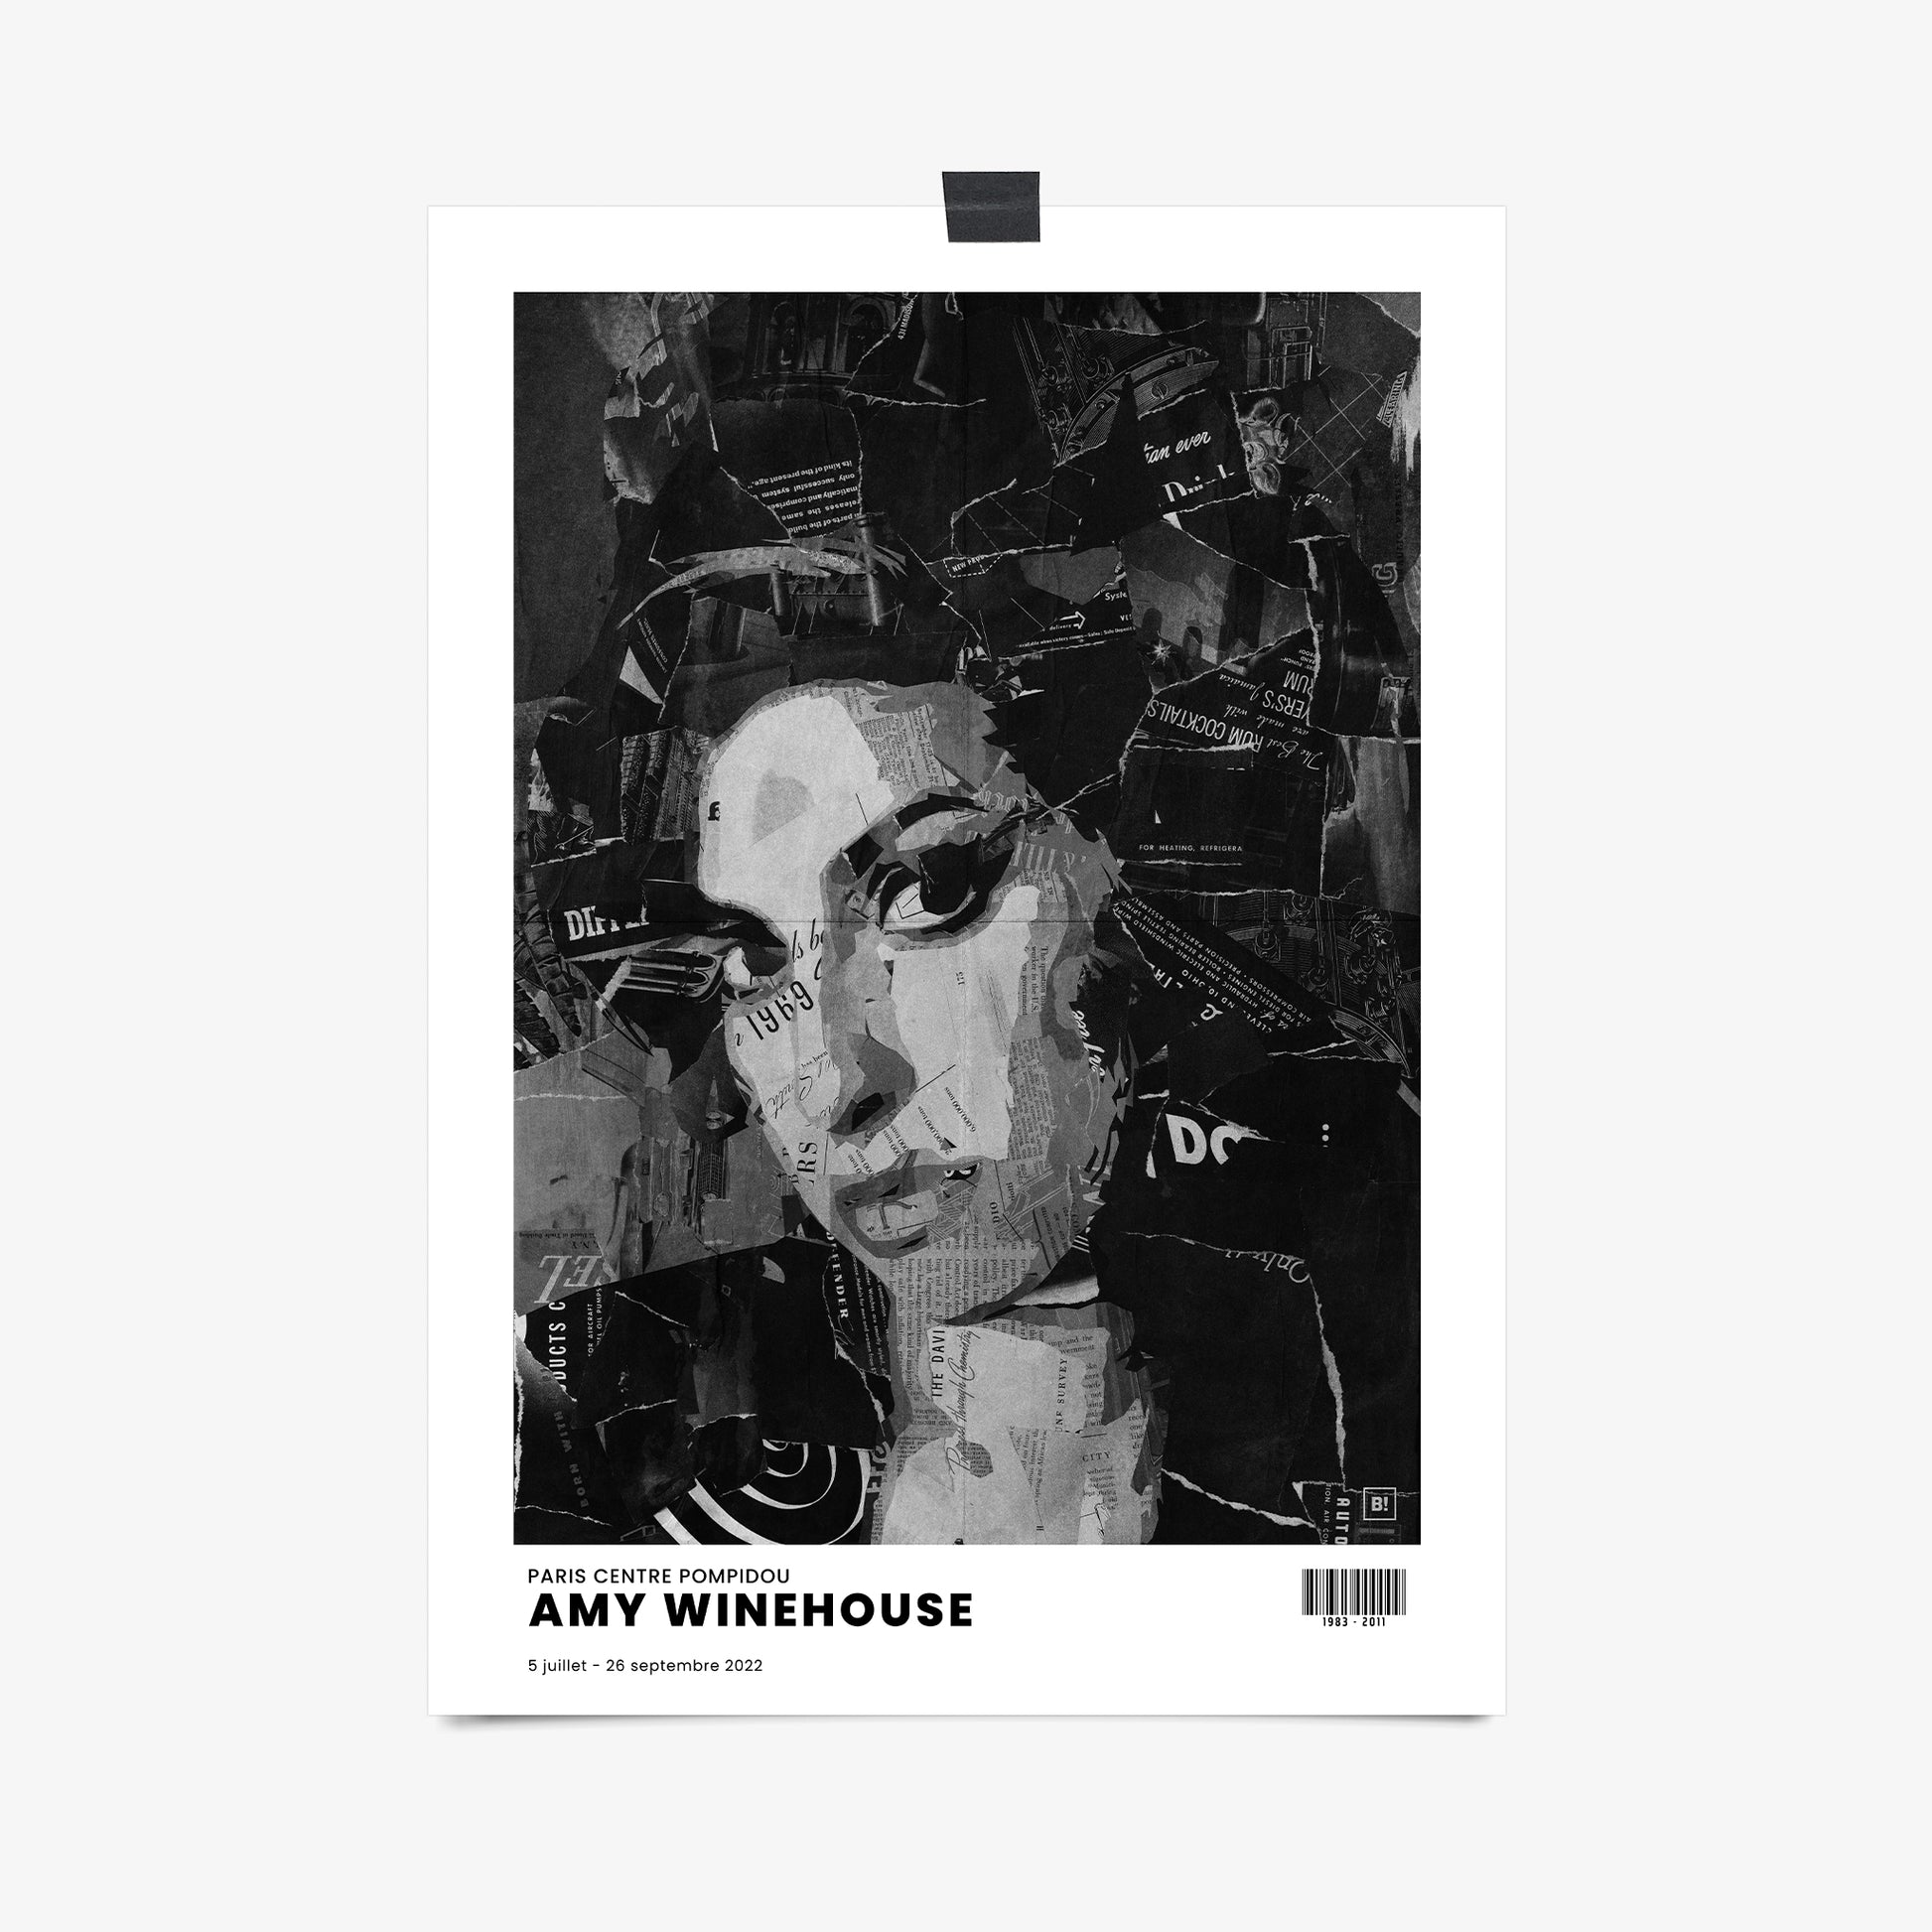 Be inspired by Iconic Amy Winehouse Paris Centre Pompidou Exhibition Art Print. This artwork is printed using giclée on archival acid-free paper, capturing its timeless beauty in every detail.